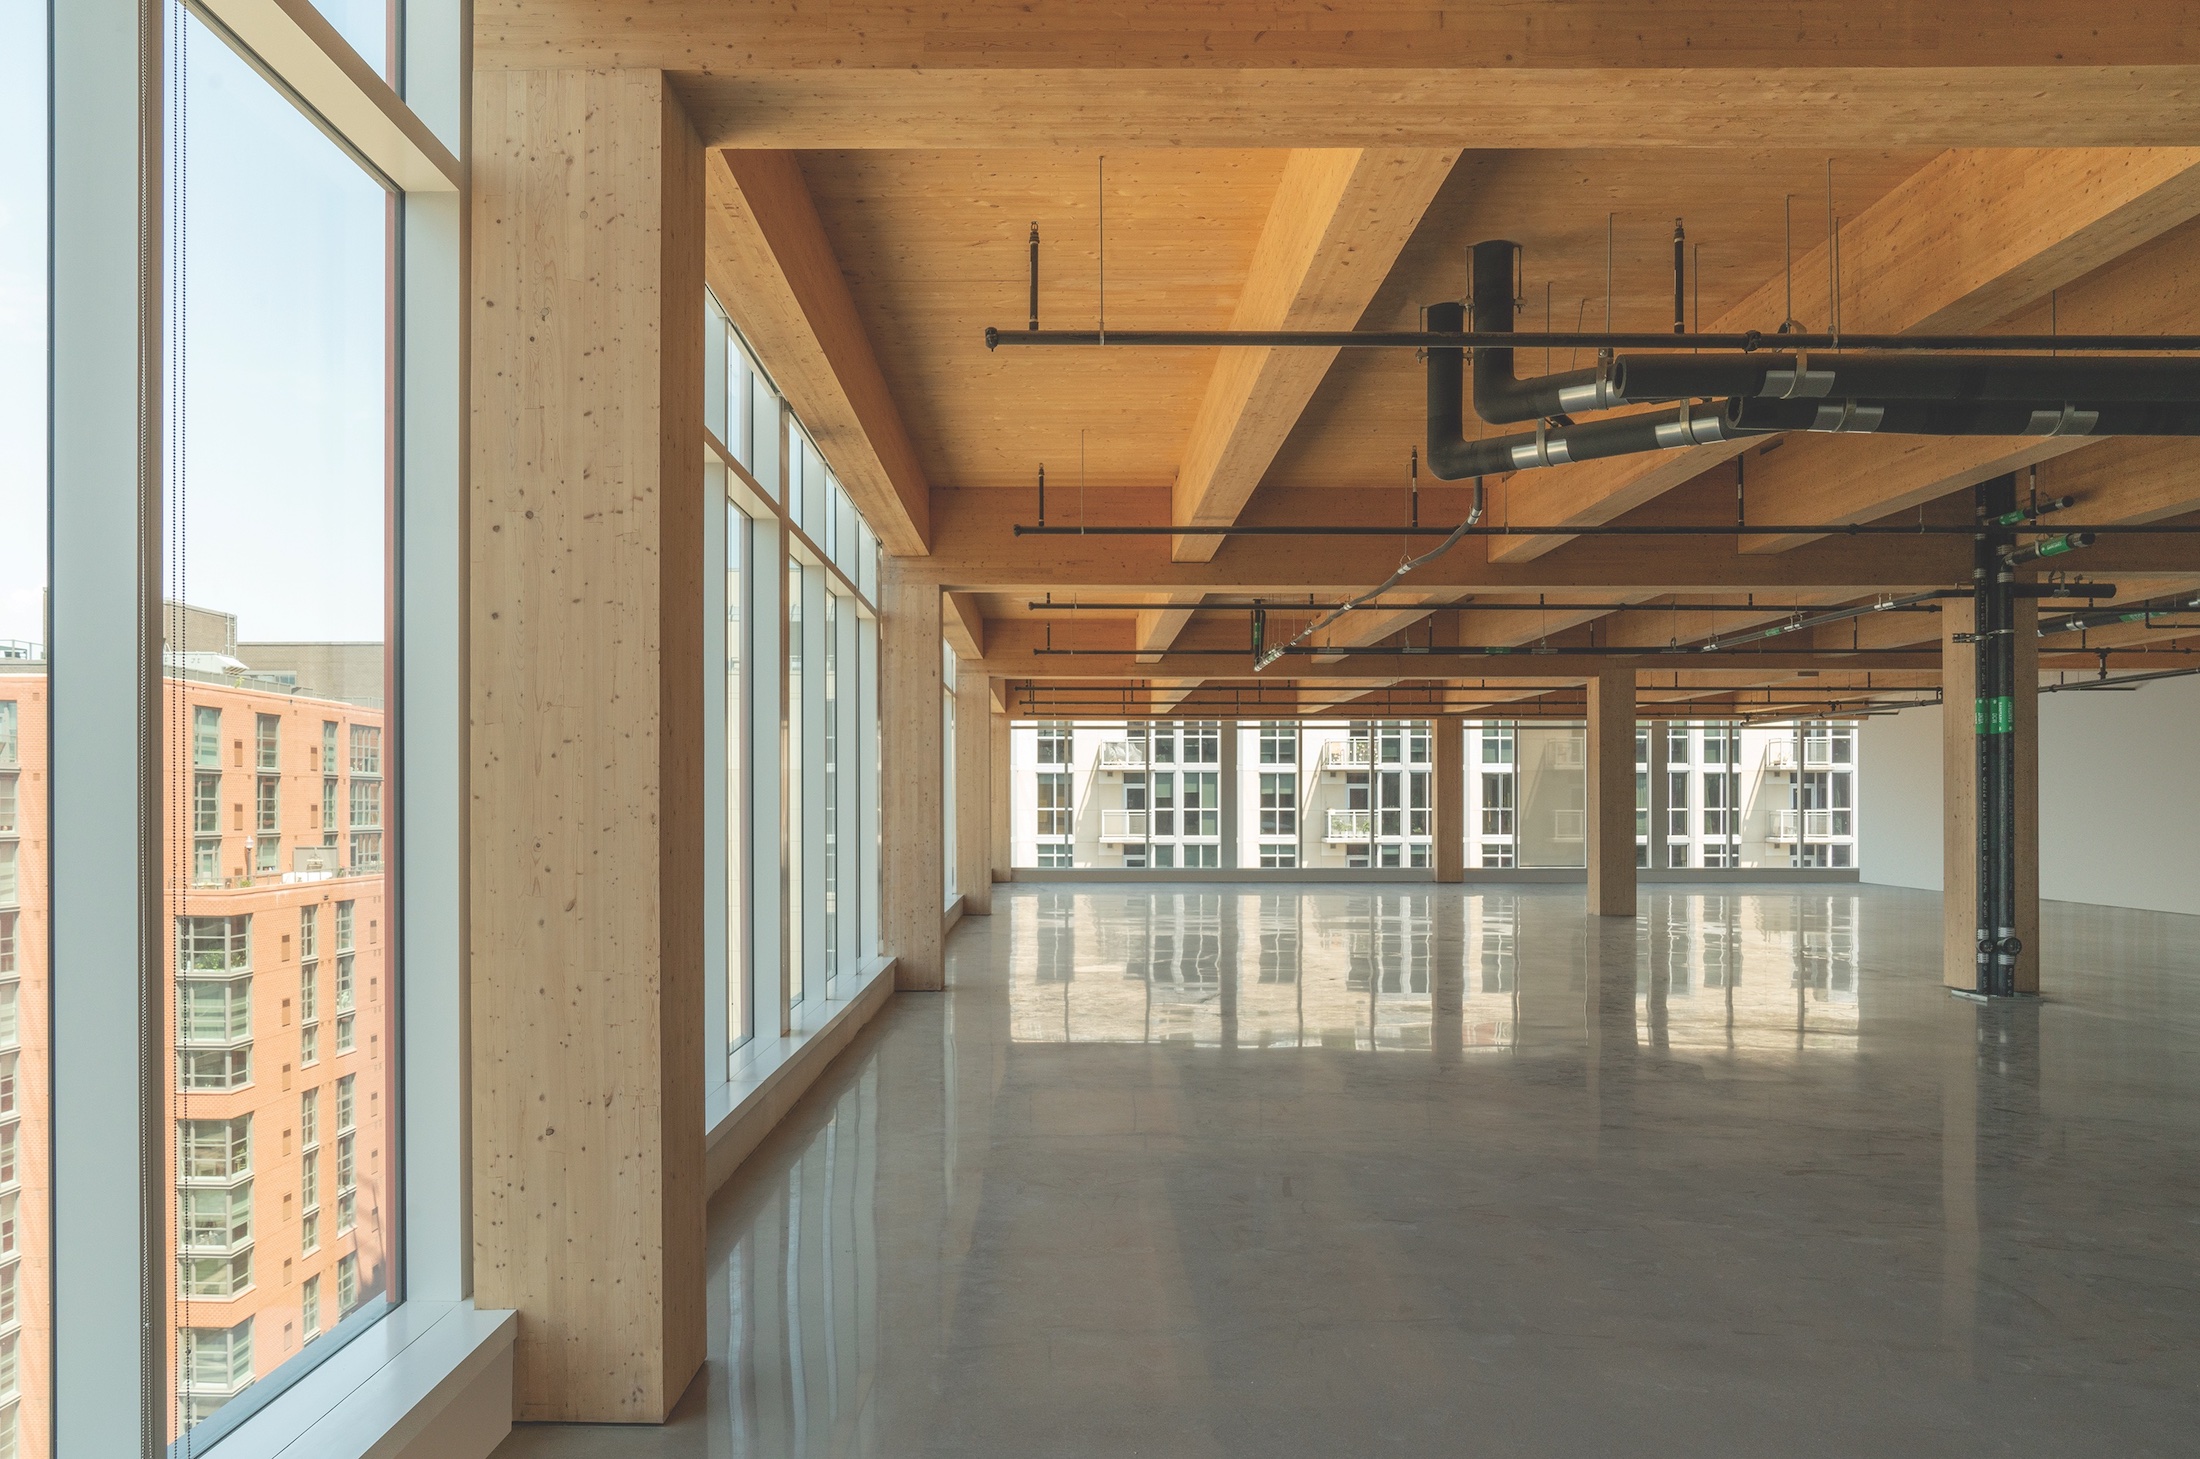 5 solutions to acoustic issues in mass timber buildings